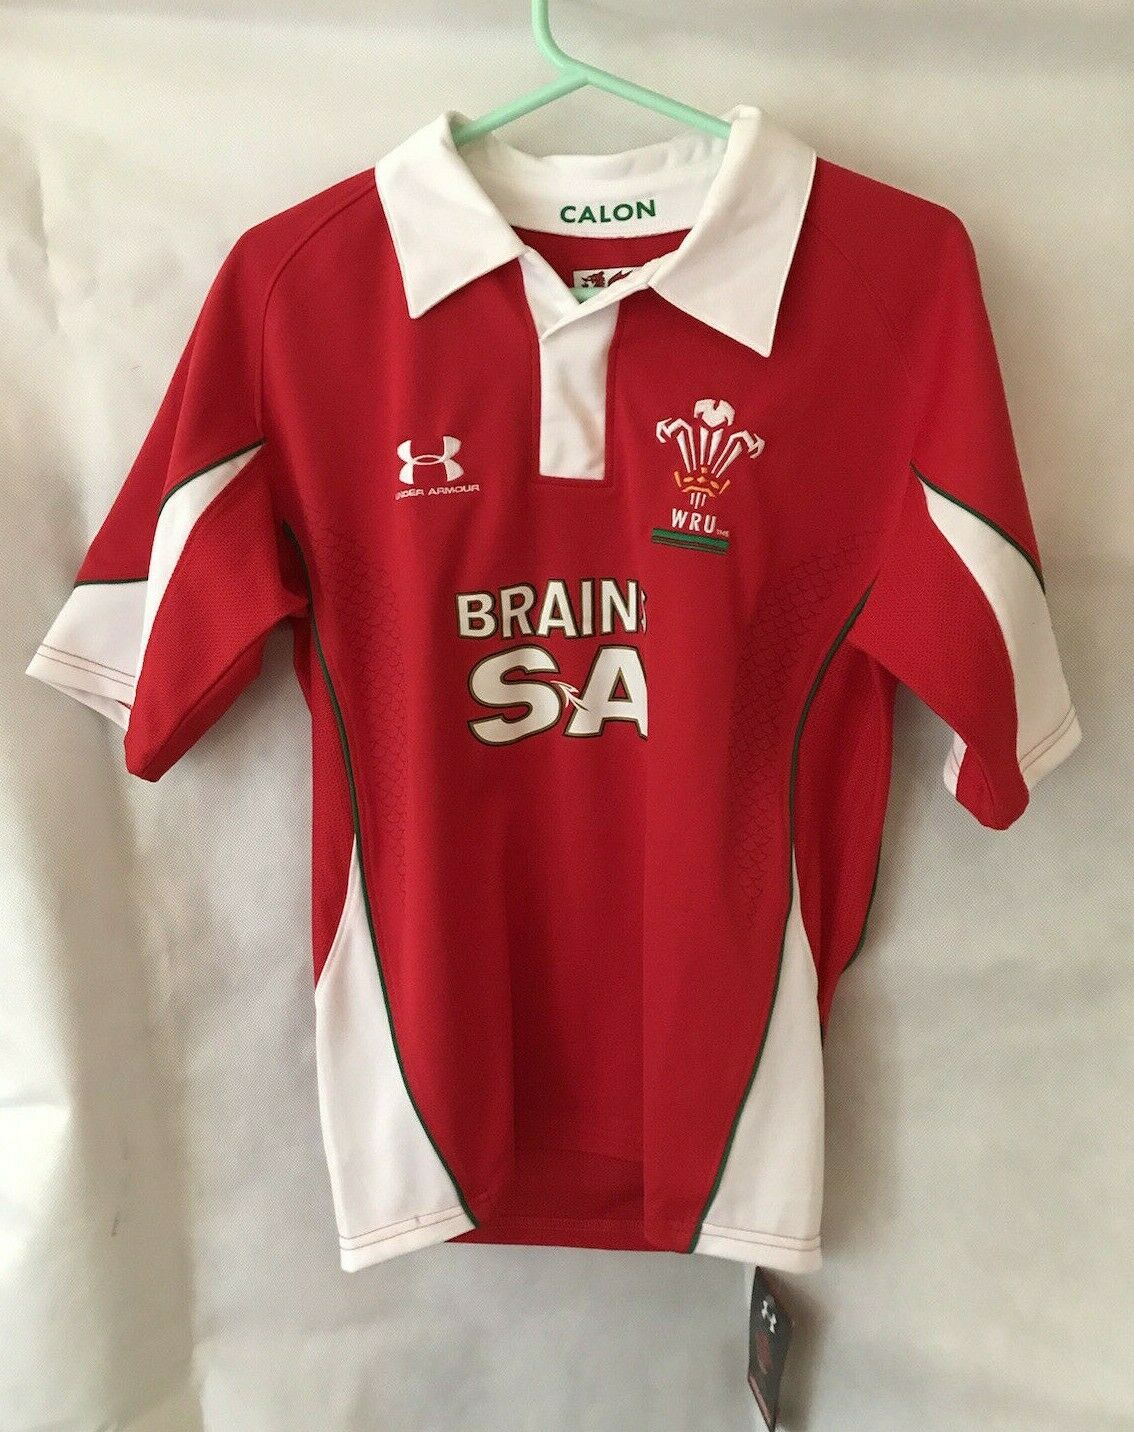 Wales Rugby Shirt - 38" Chest - Under Armour - Brand New